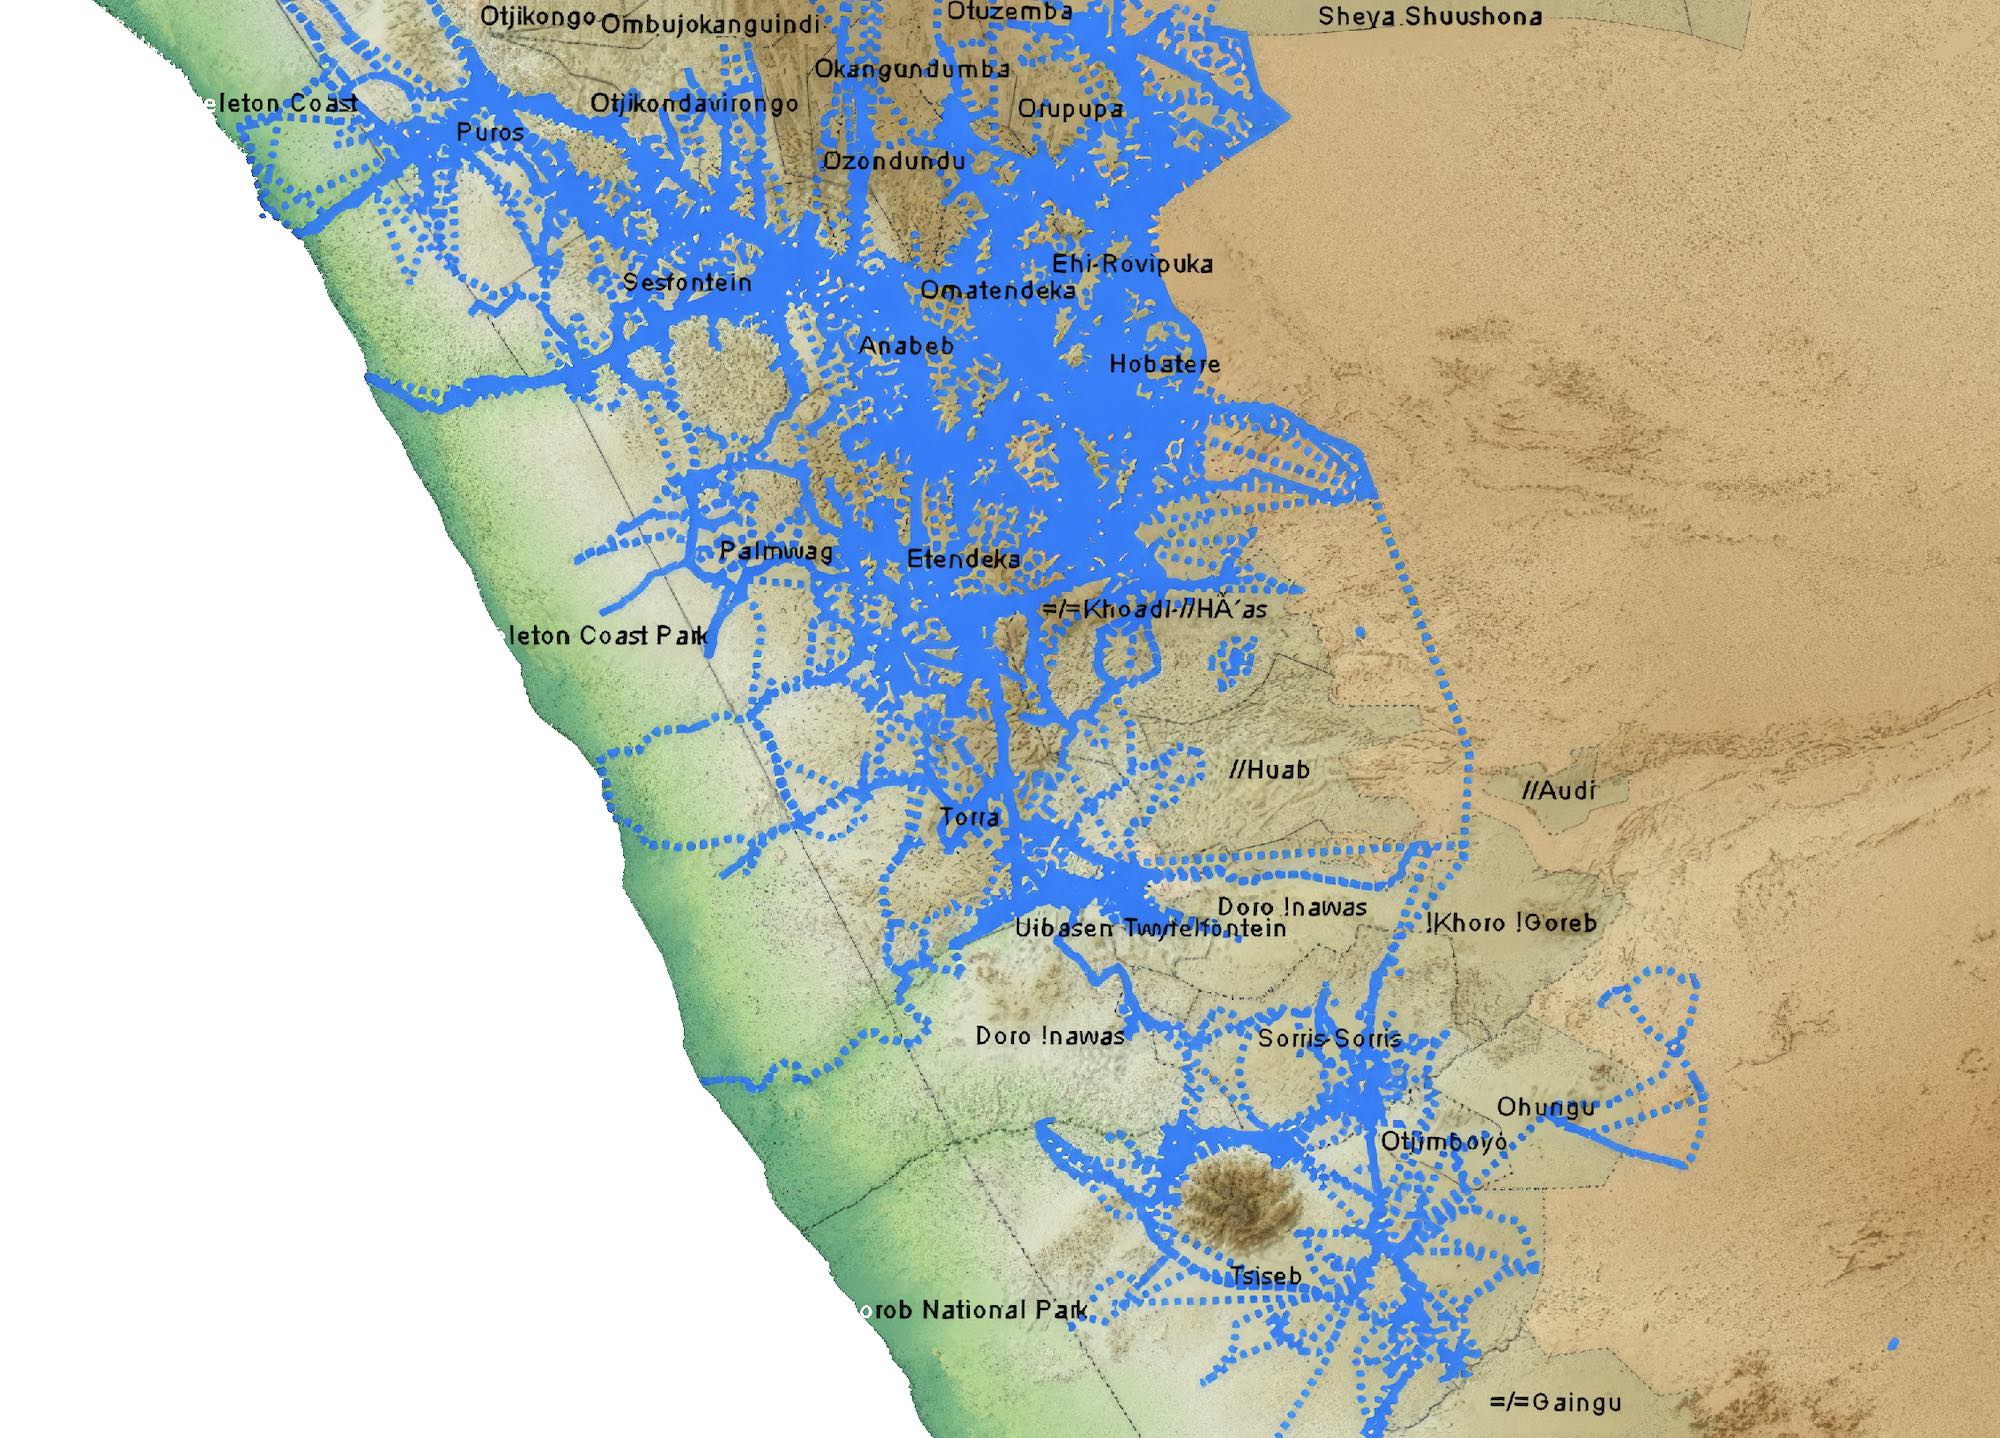 A map exported from the SMART app showing the vast distanced traversed by Lion Rangers in 2022.